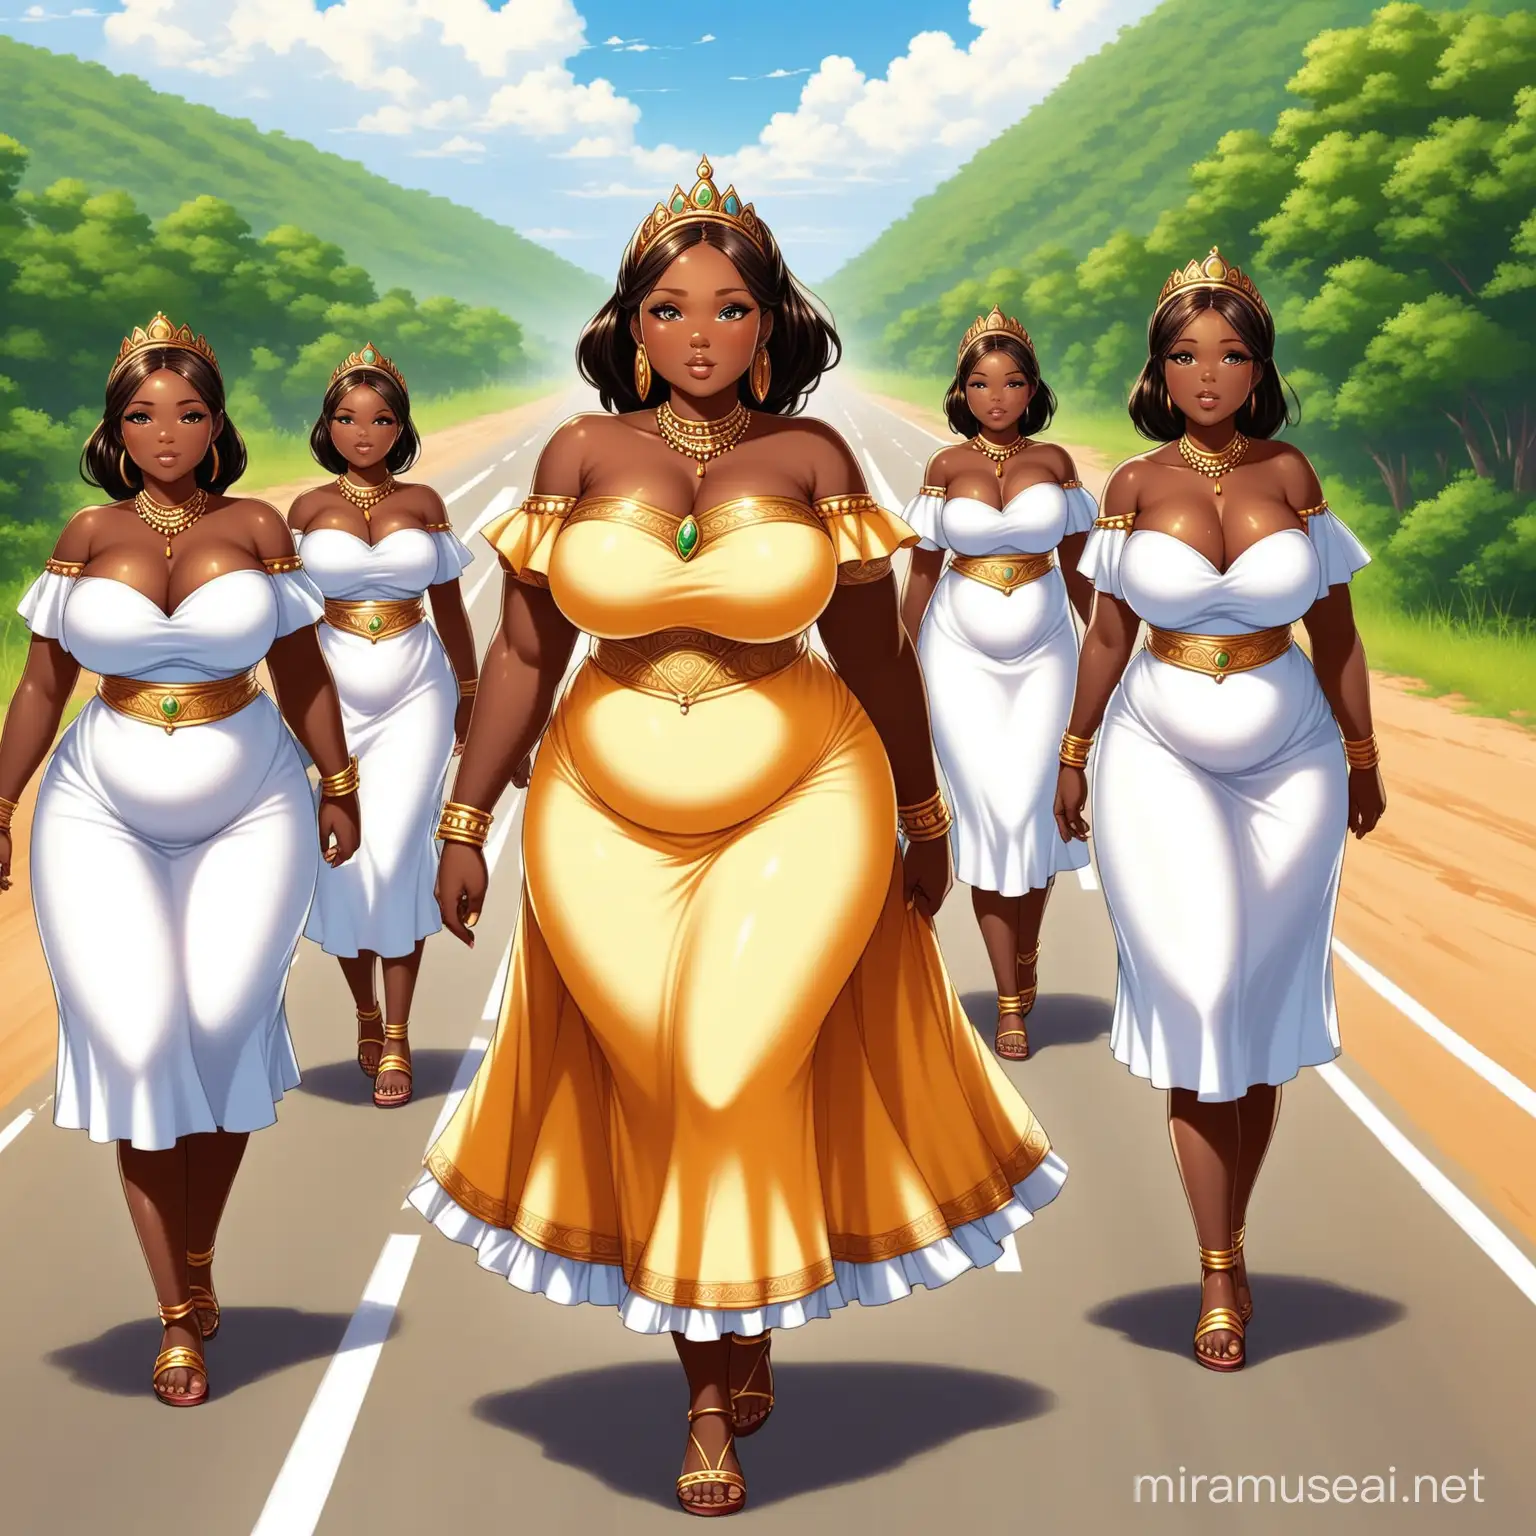 Beautiful chubby African princess and her admiring maids on the road as she walks by